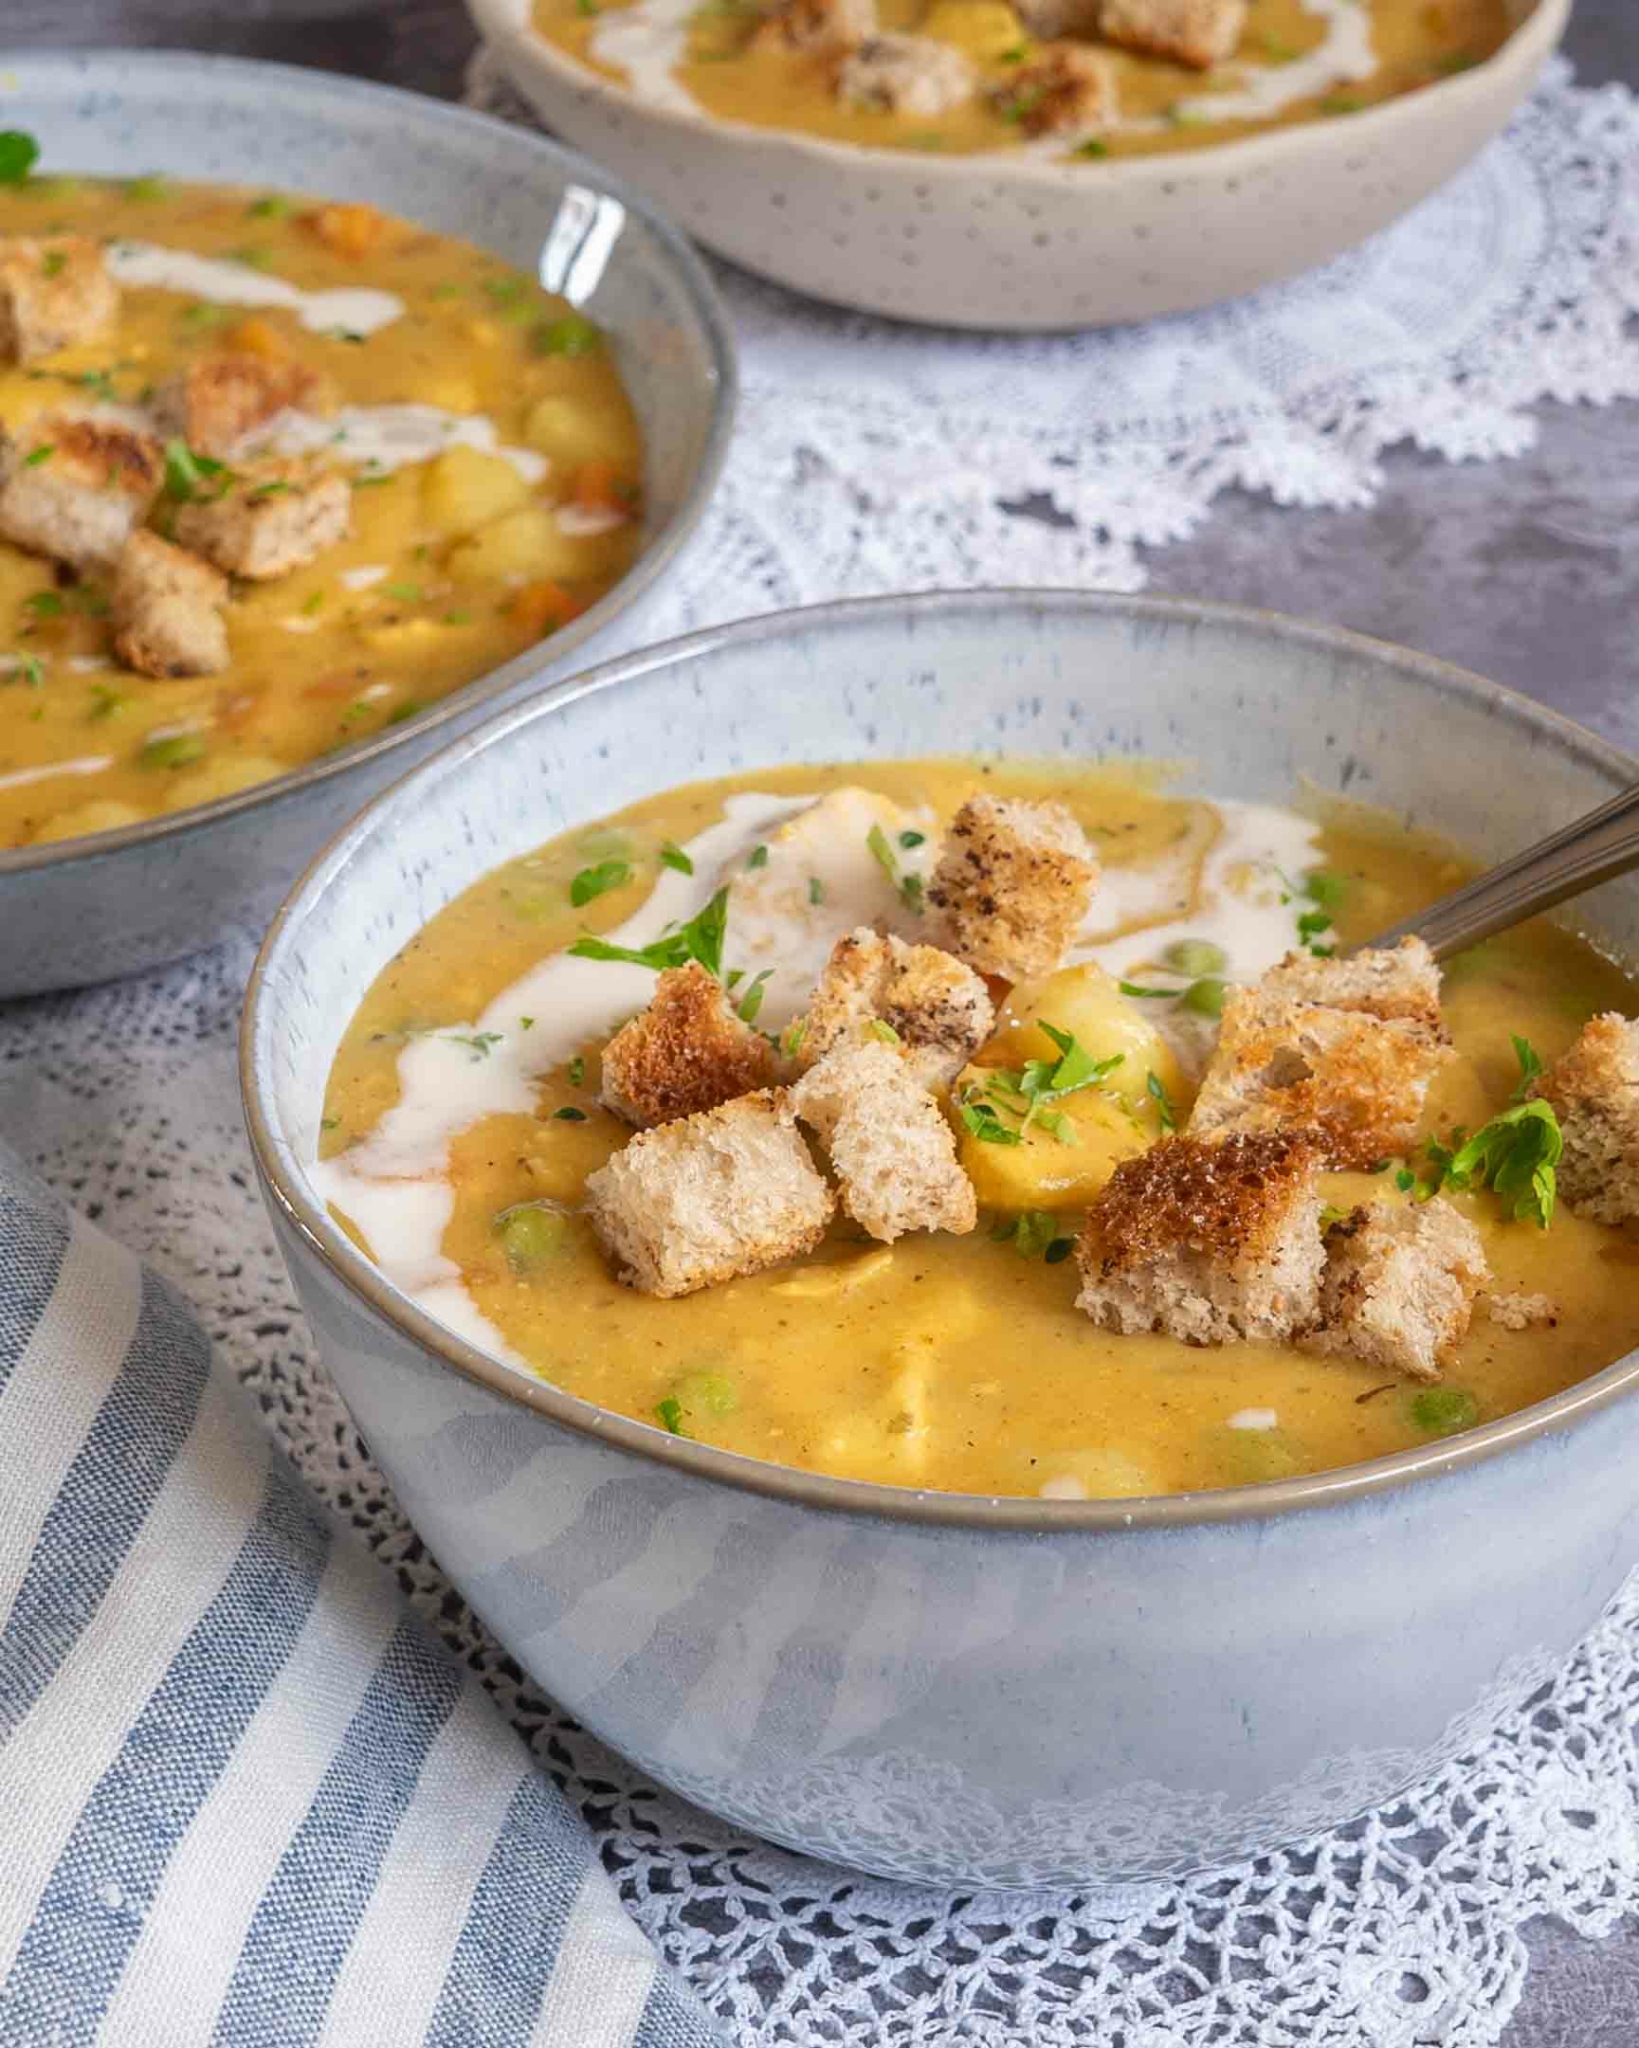 https://aveganvisit.com/wp-content/uploads/2020/11/Vegan-Creamy-Chicken-Vegetable-Soup-Dairy-Free-1-ws-scaled.jpg